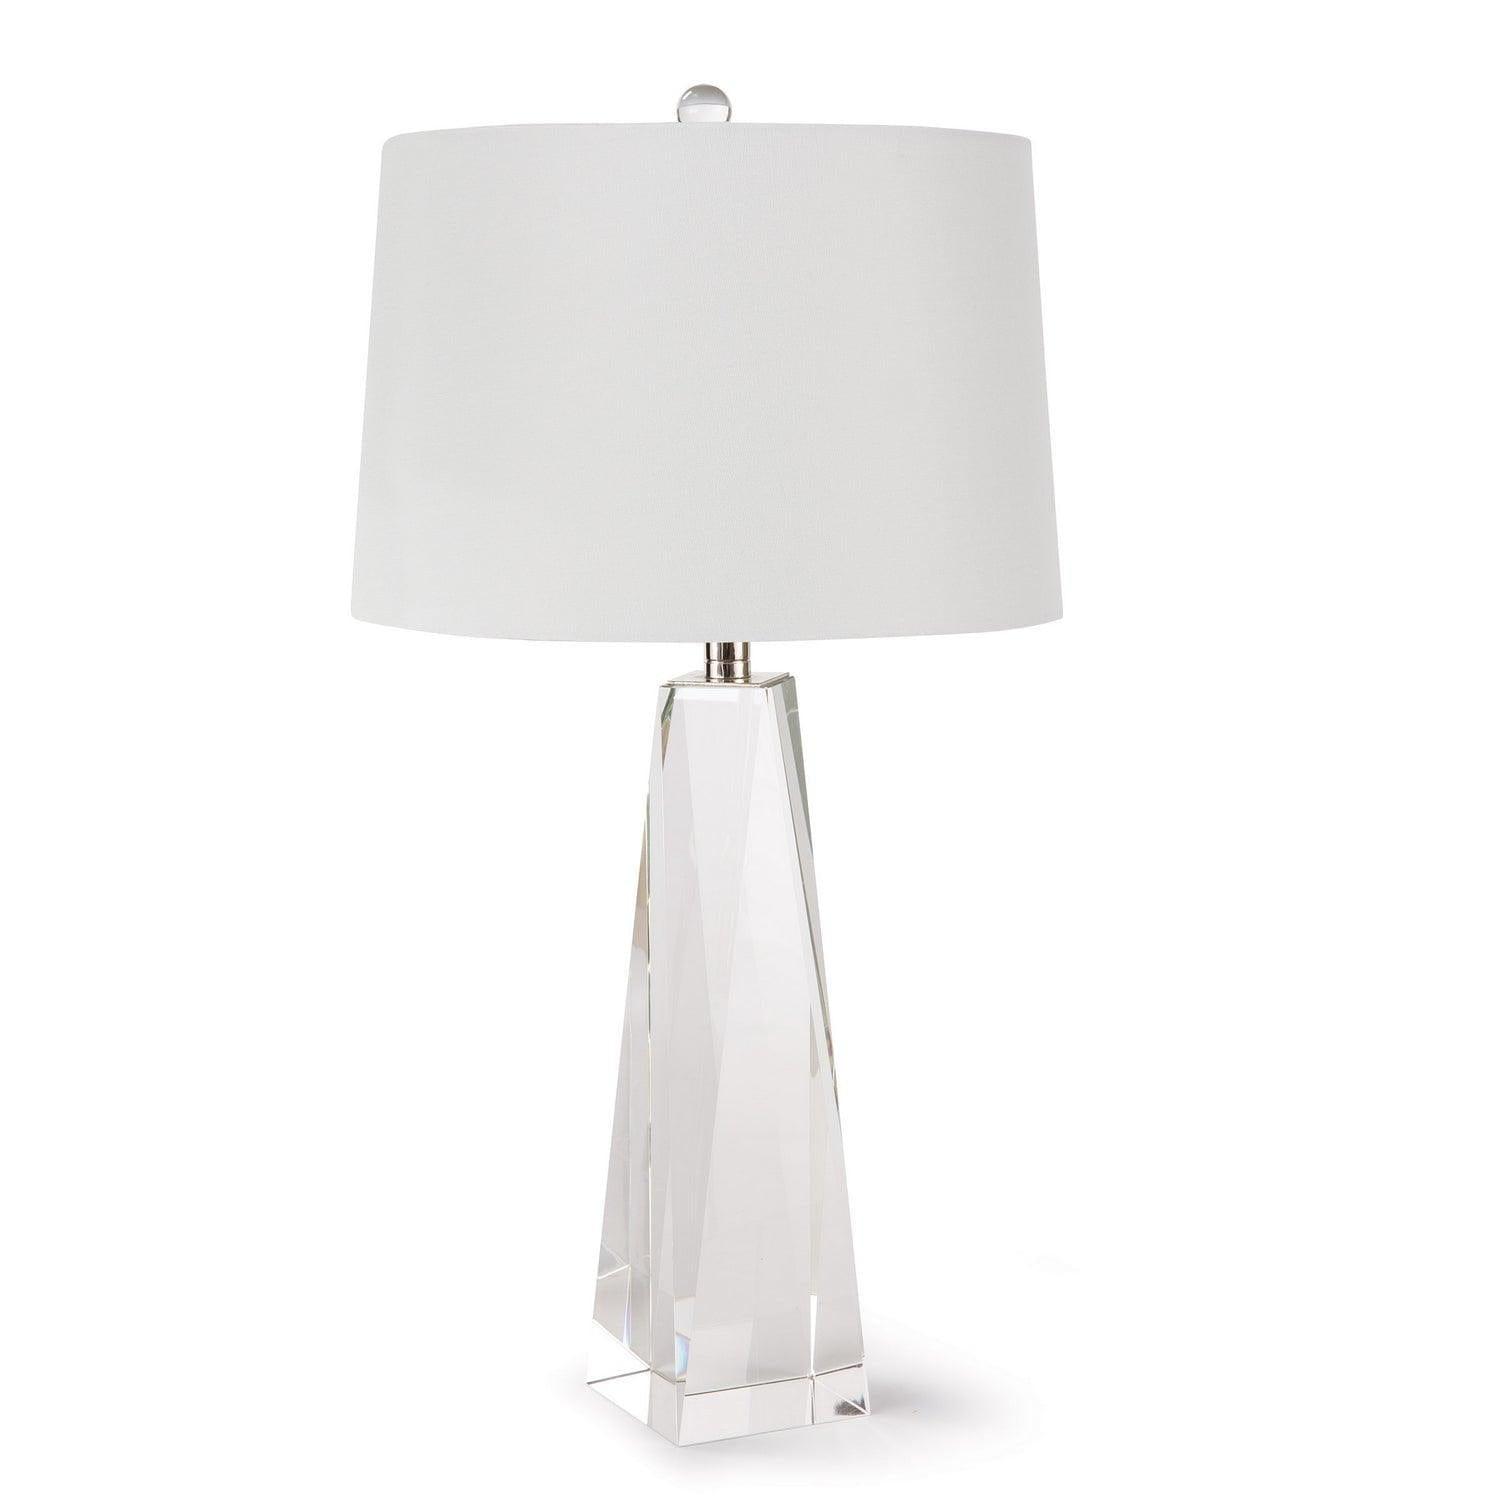 Regina Andrew - Angelica Small Crystal Table Lamp - 13-1319 | Montreal Lighting & Hardware